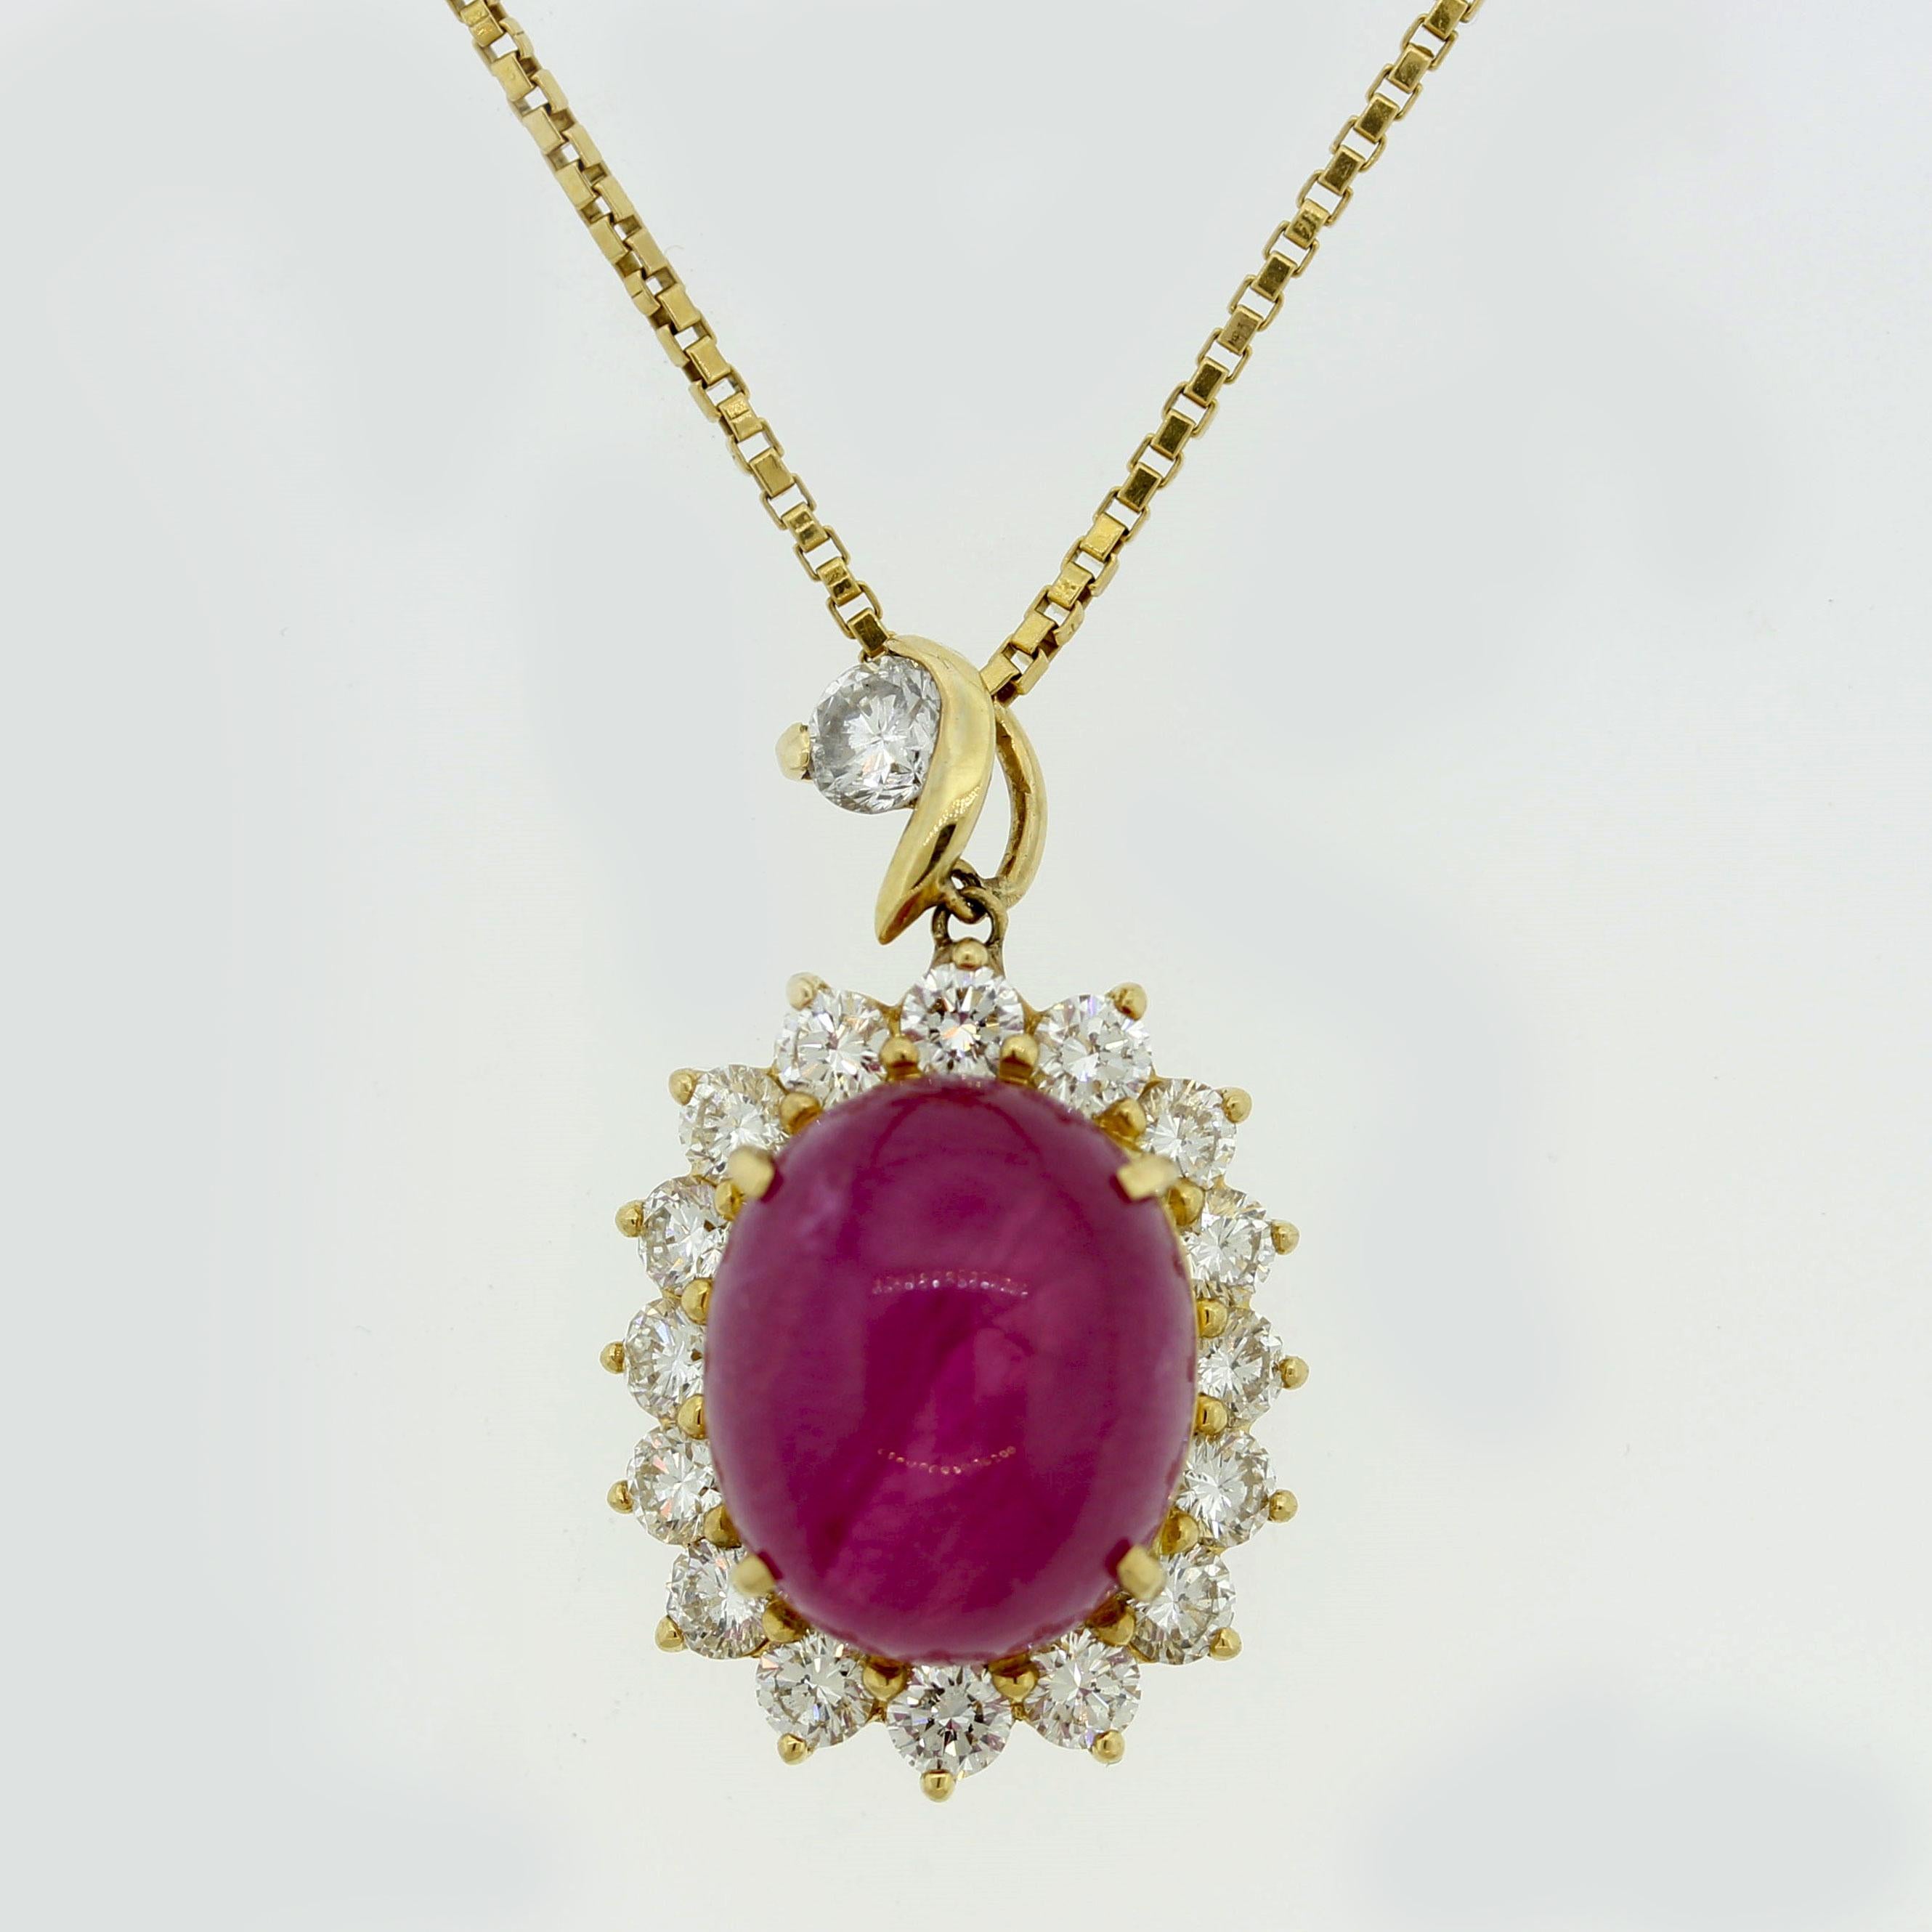 A 15.60 carat natural ruby, certified by the GIA, is the centerpiece to this special pendant. Rubies are the hardest of the big 3 gemstones (ruby, sapphire, emerald) to find in large sizes with nice color. Anything over 5 carats is rare, but 15